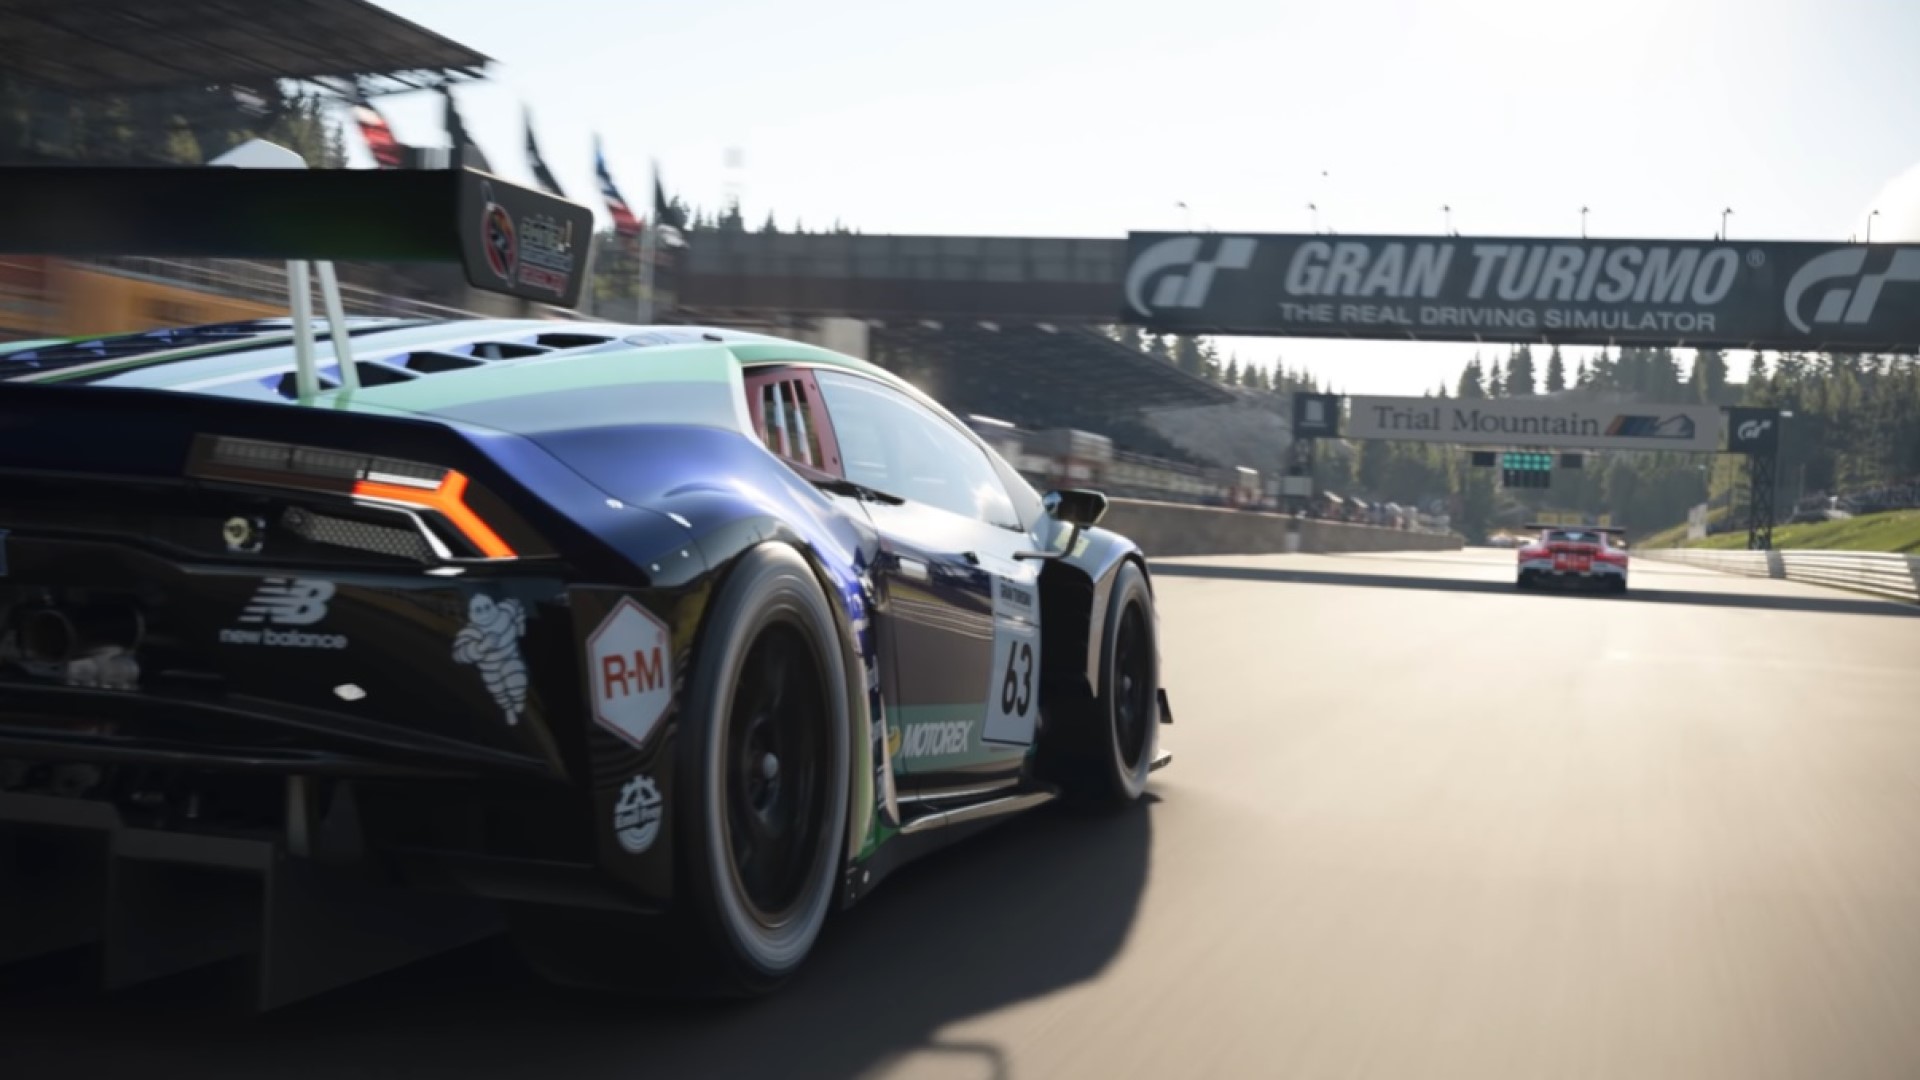 Gran Turismo 7 Download Size is Nearly 90 GB on PS5